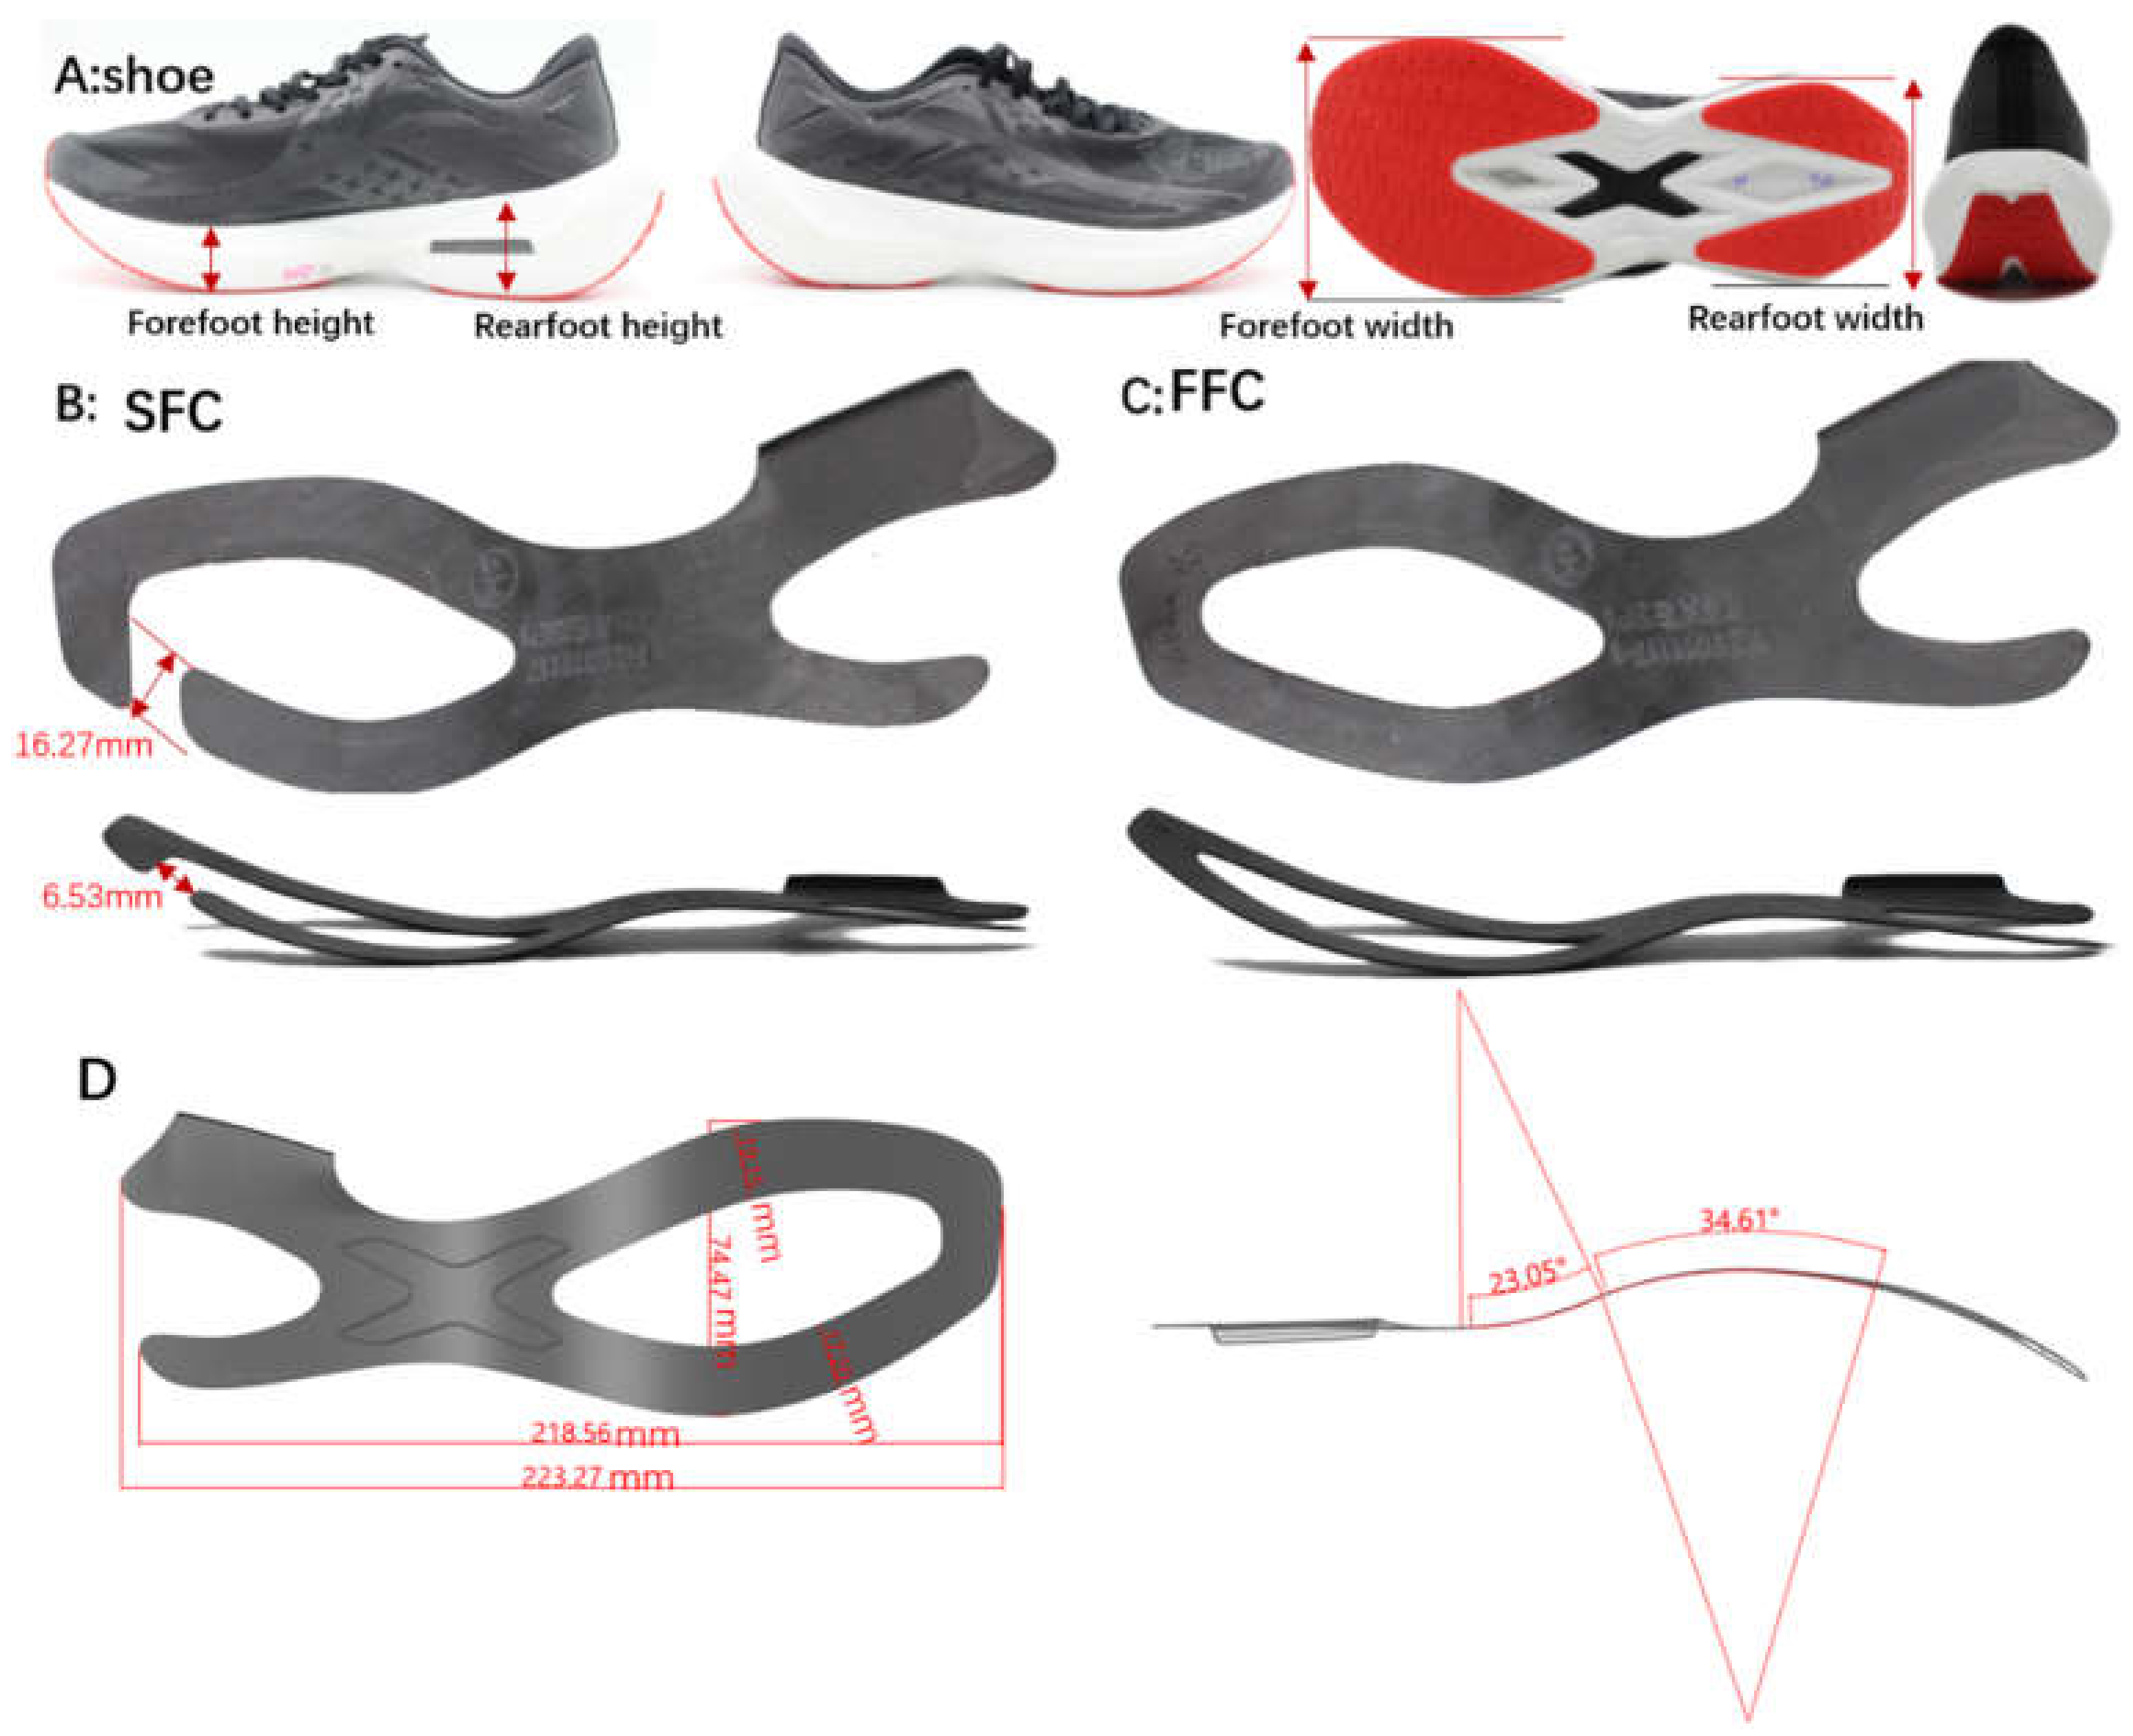 Materials | Free Full-Text | Effect of the Construction of Carbon Fiber  Plate Insert to Midsole on Running Performance